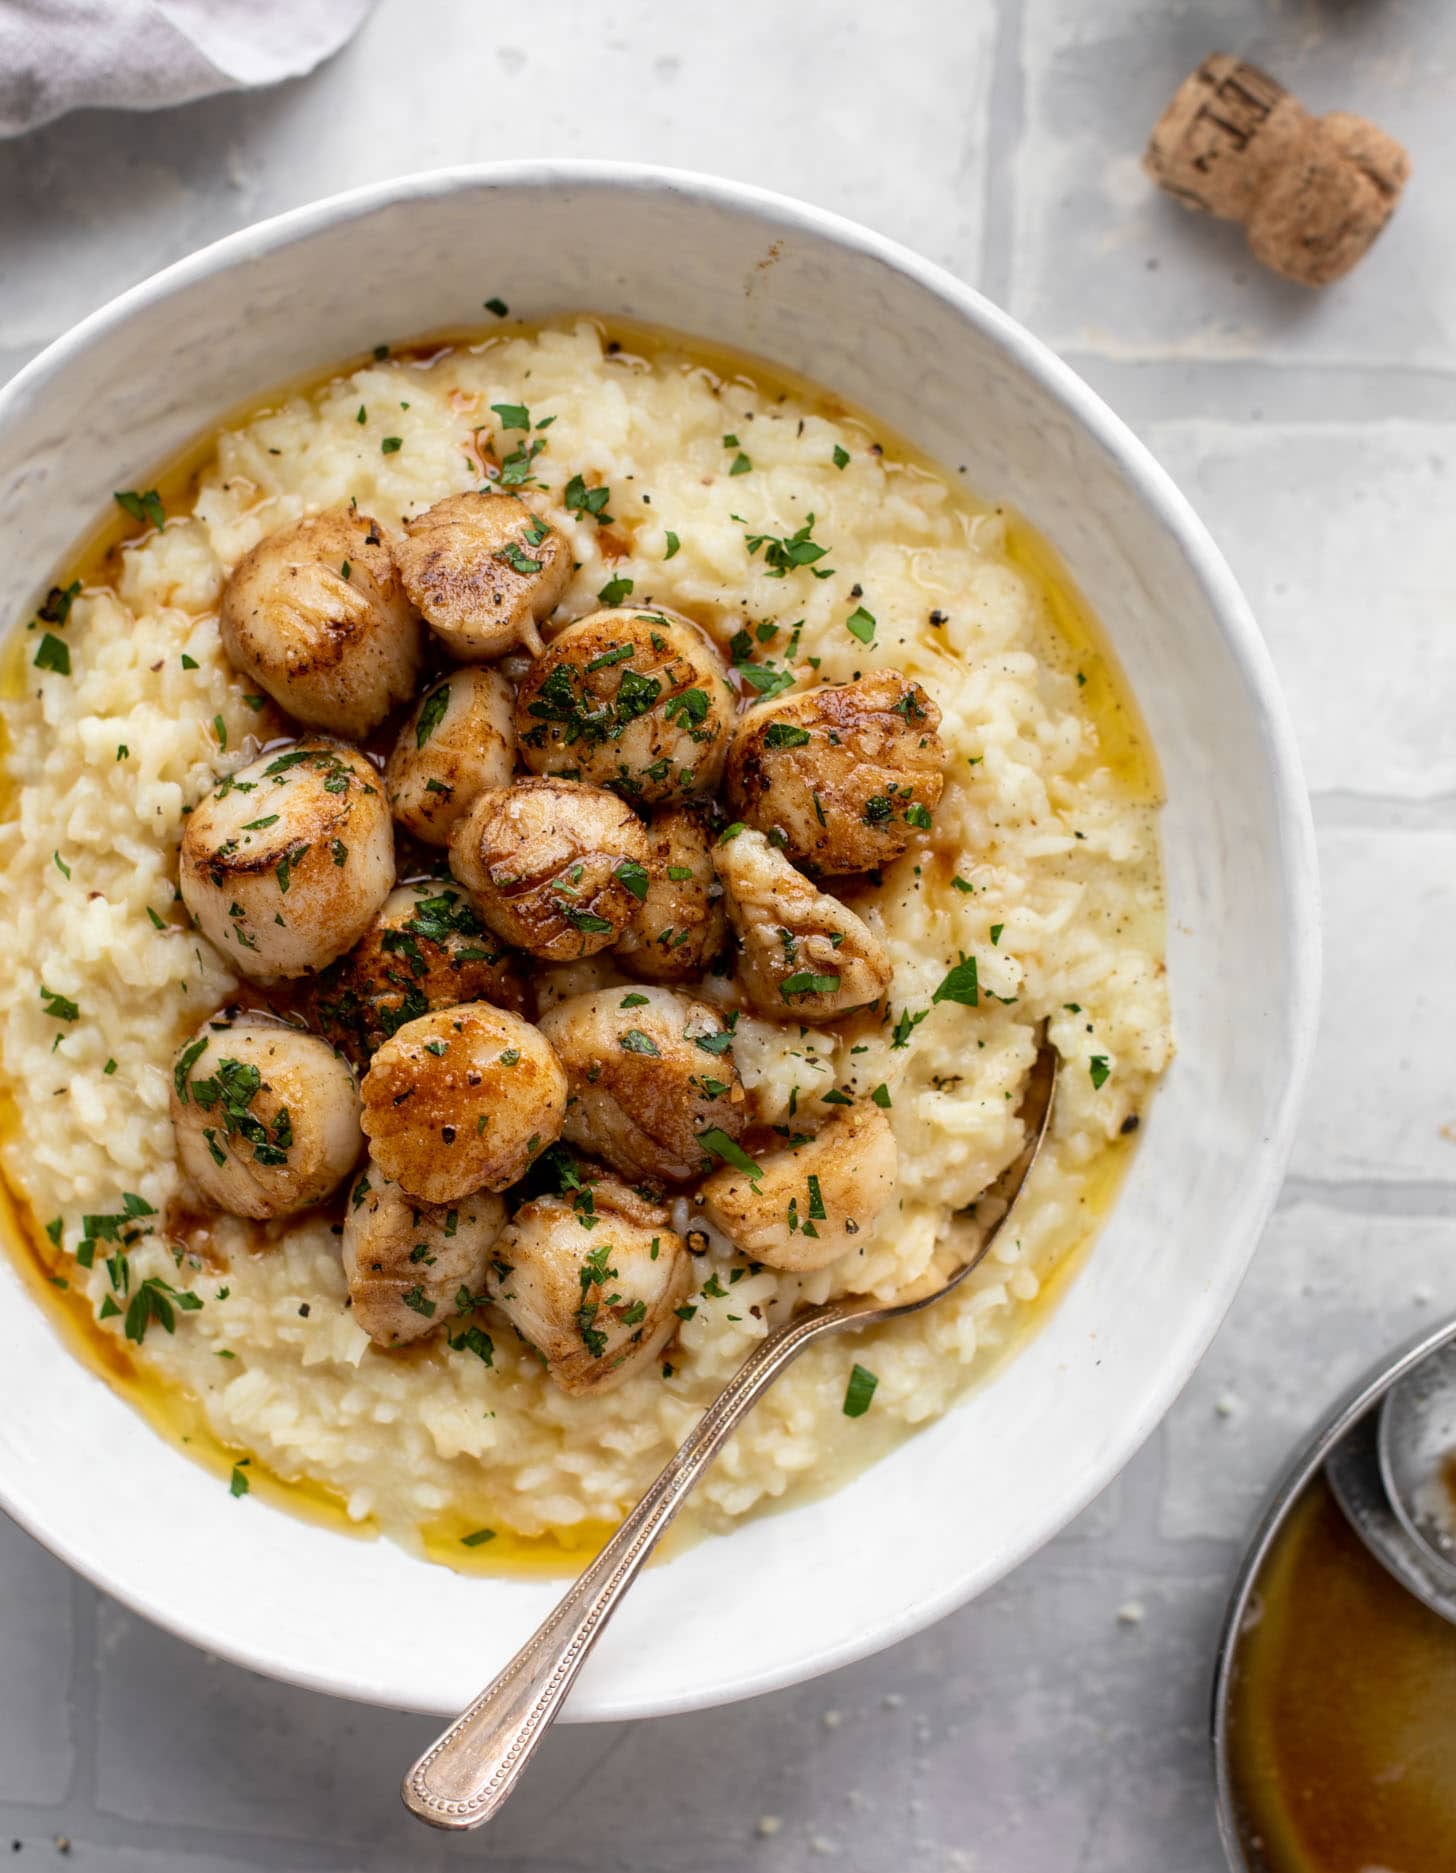 Scallop Risotto - Champagne Risotto with Brown Butter Scallops